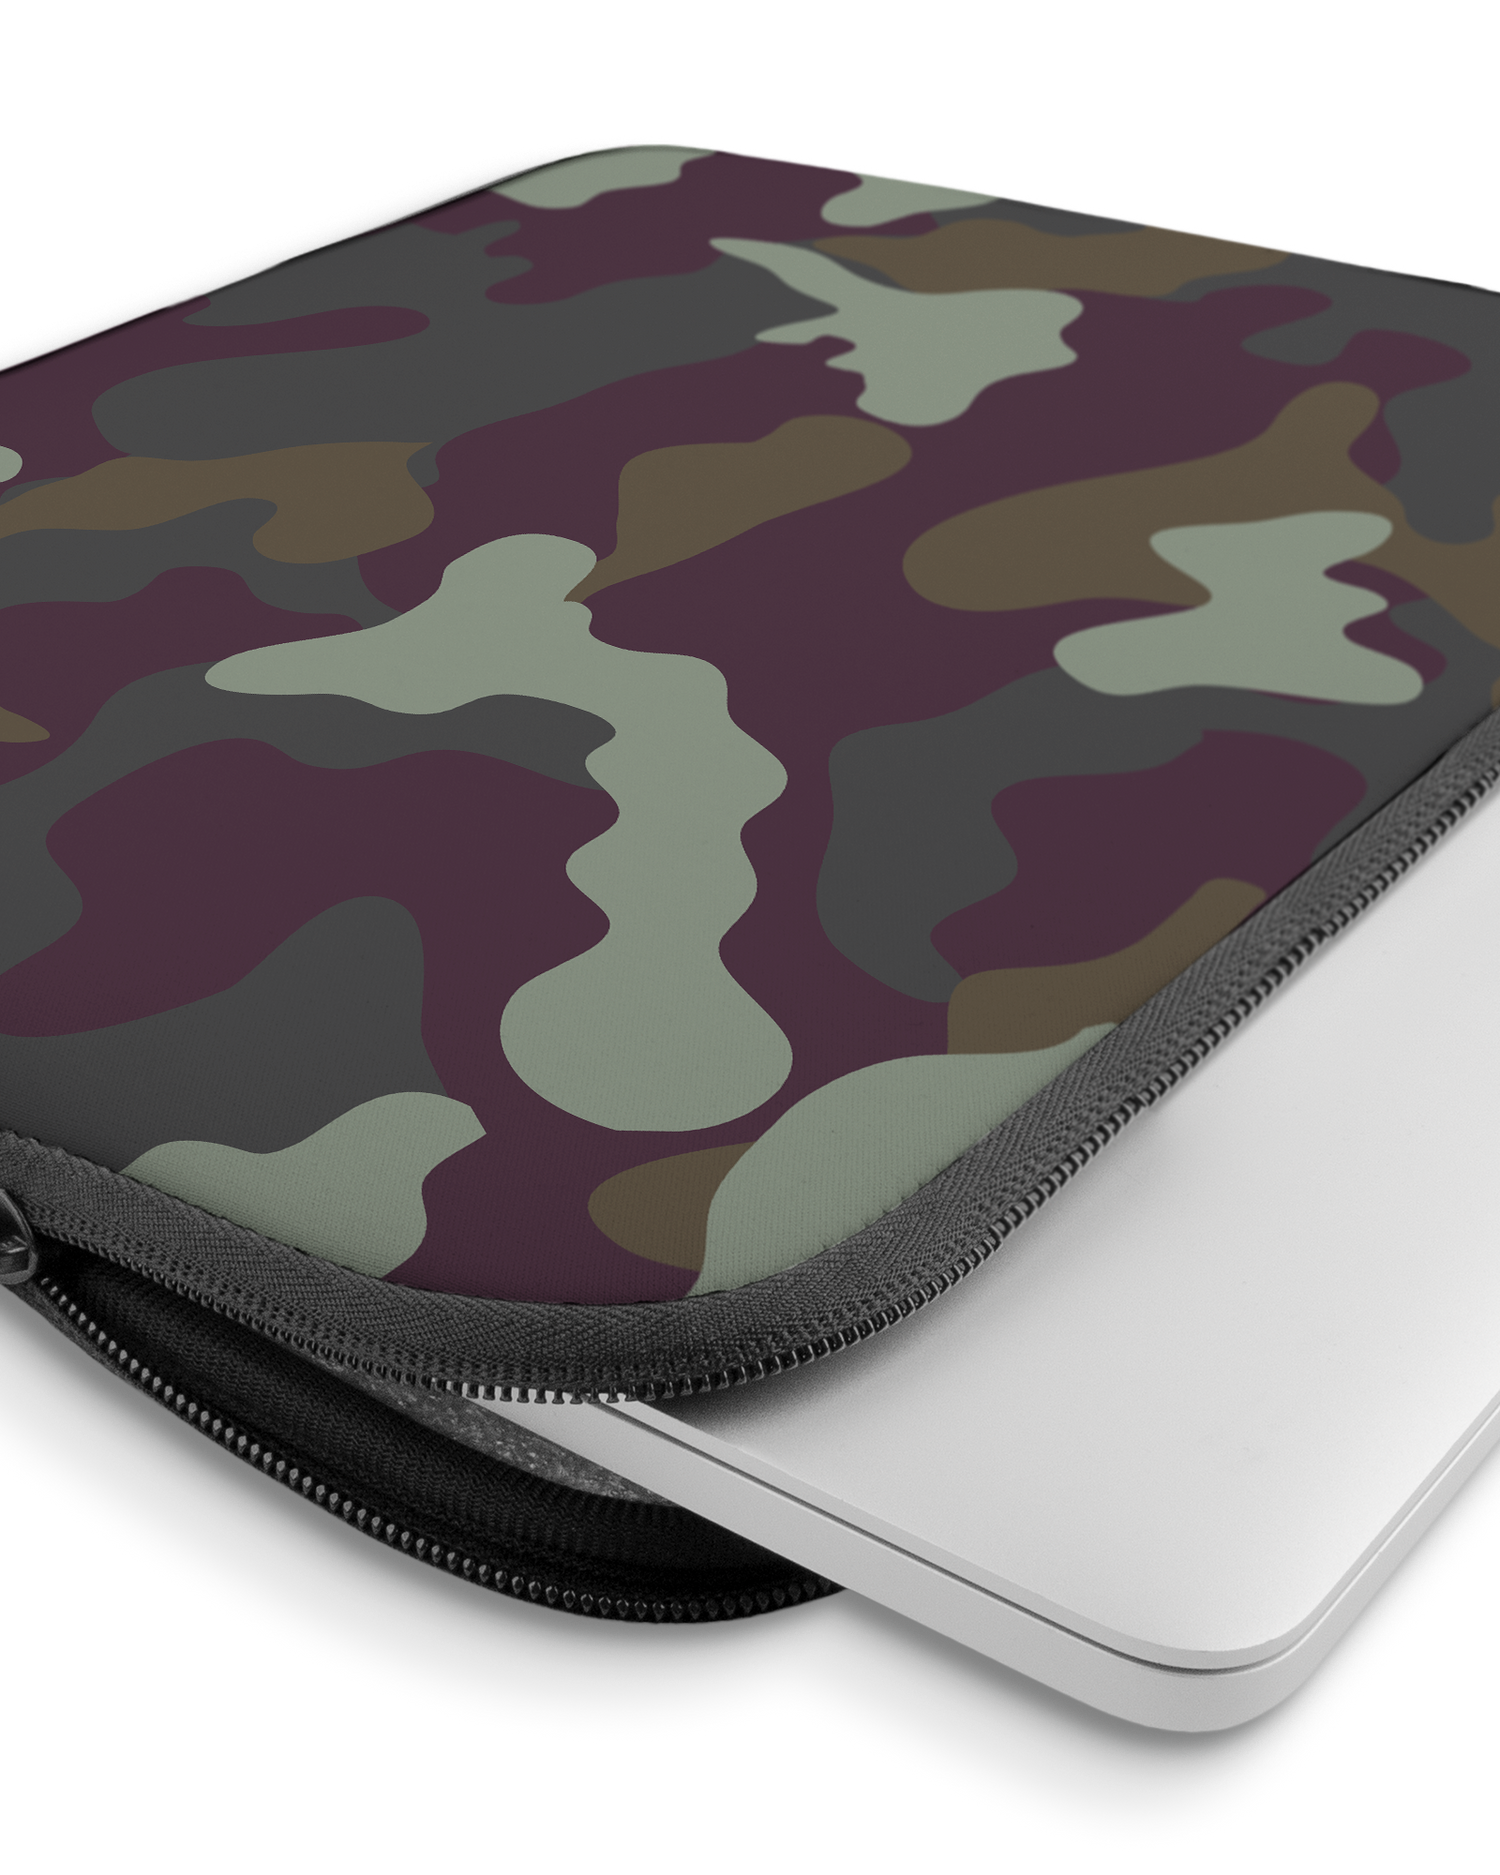 Night Camo Laptop Case 15 inch with device inside